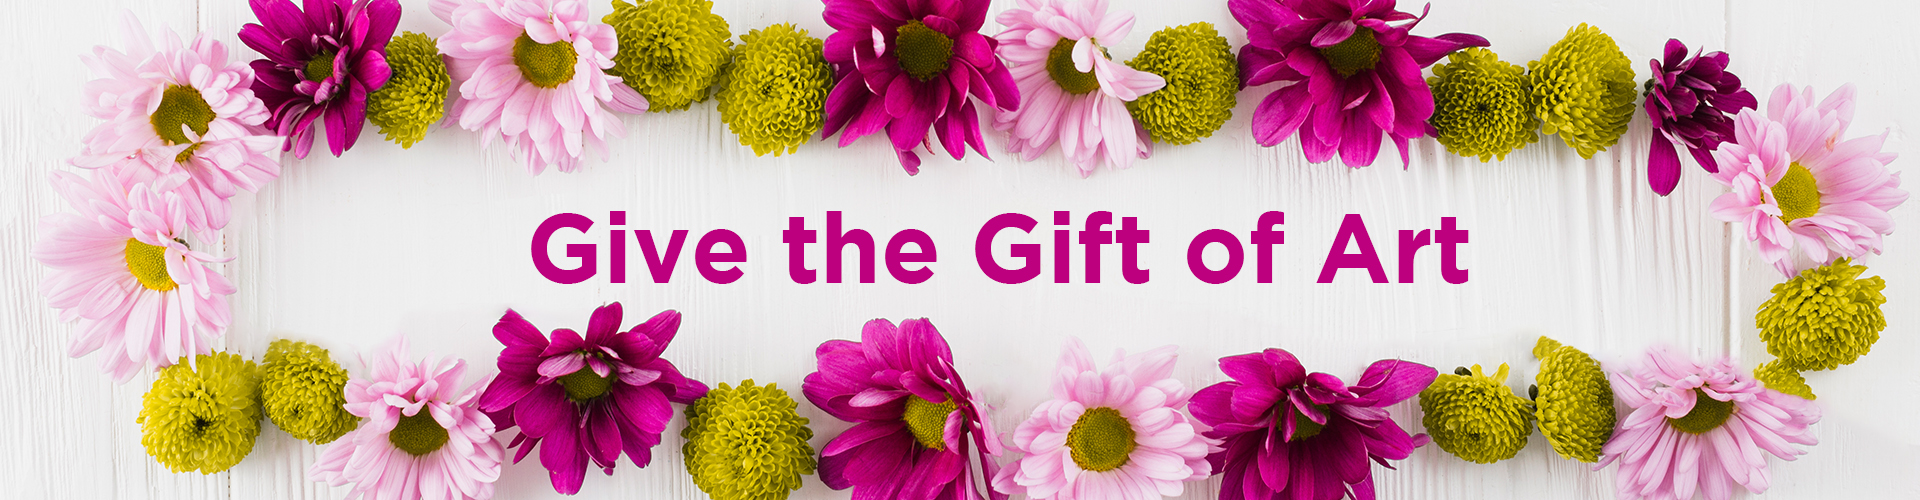 "Give the Gift of Art" text with flower border